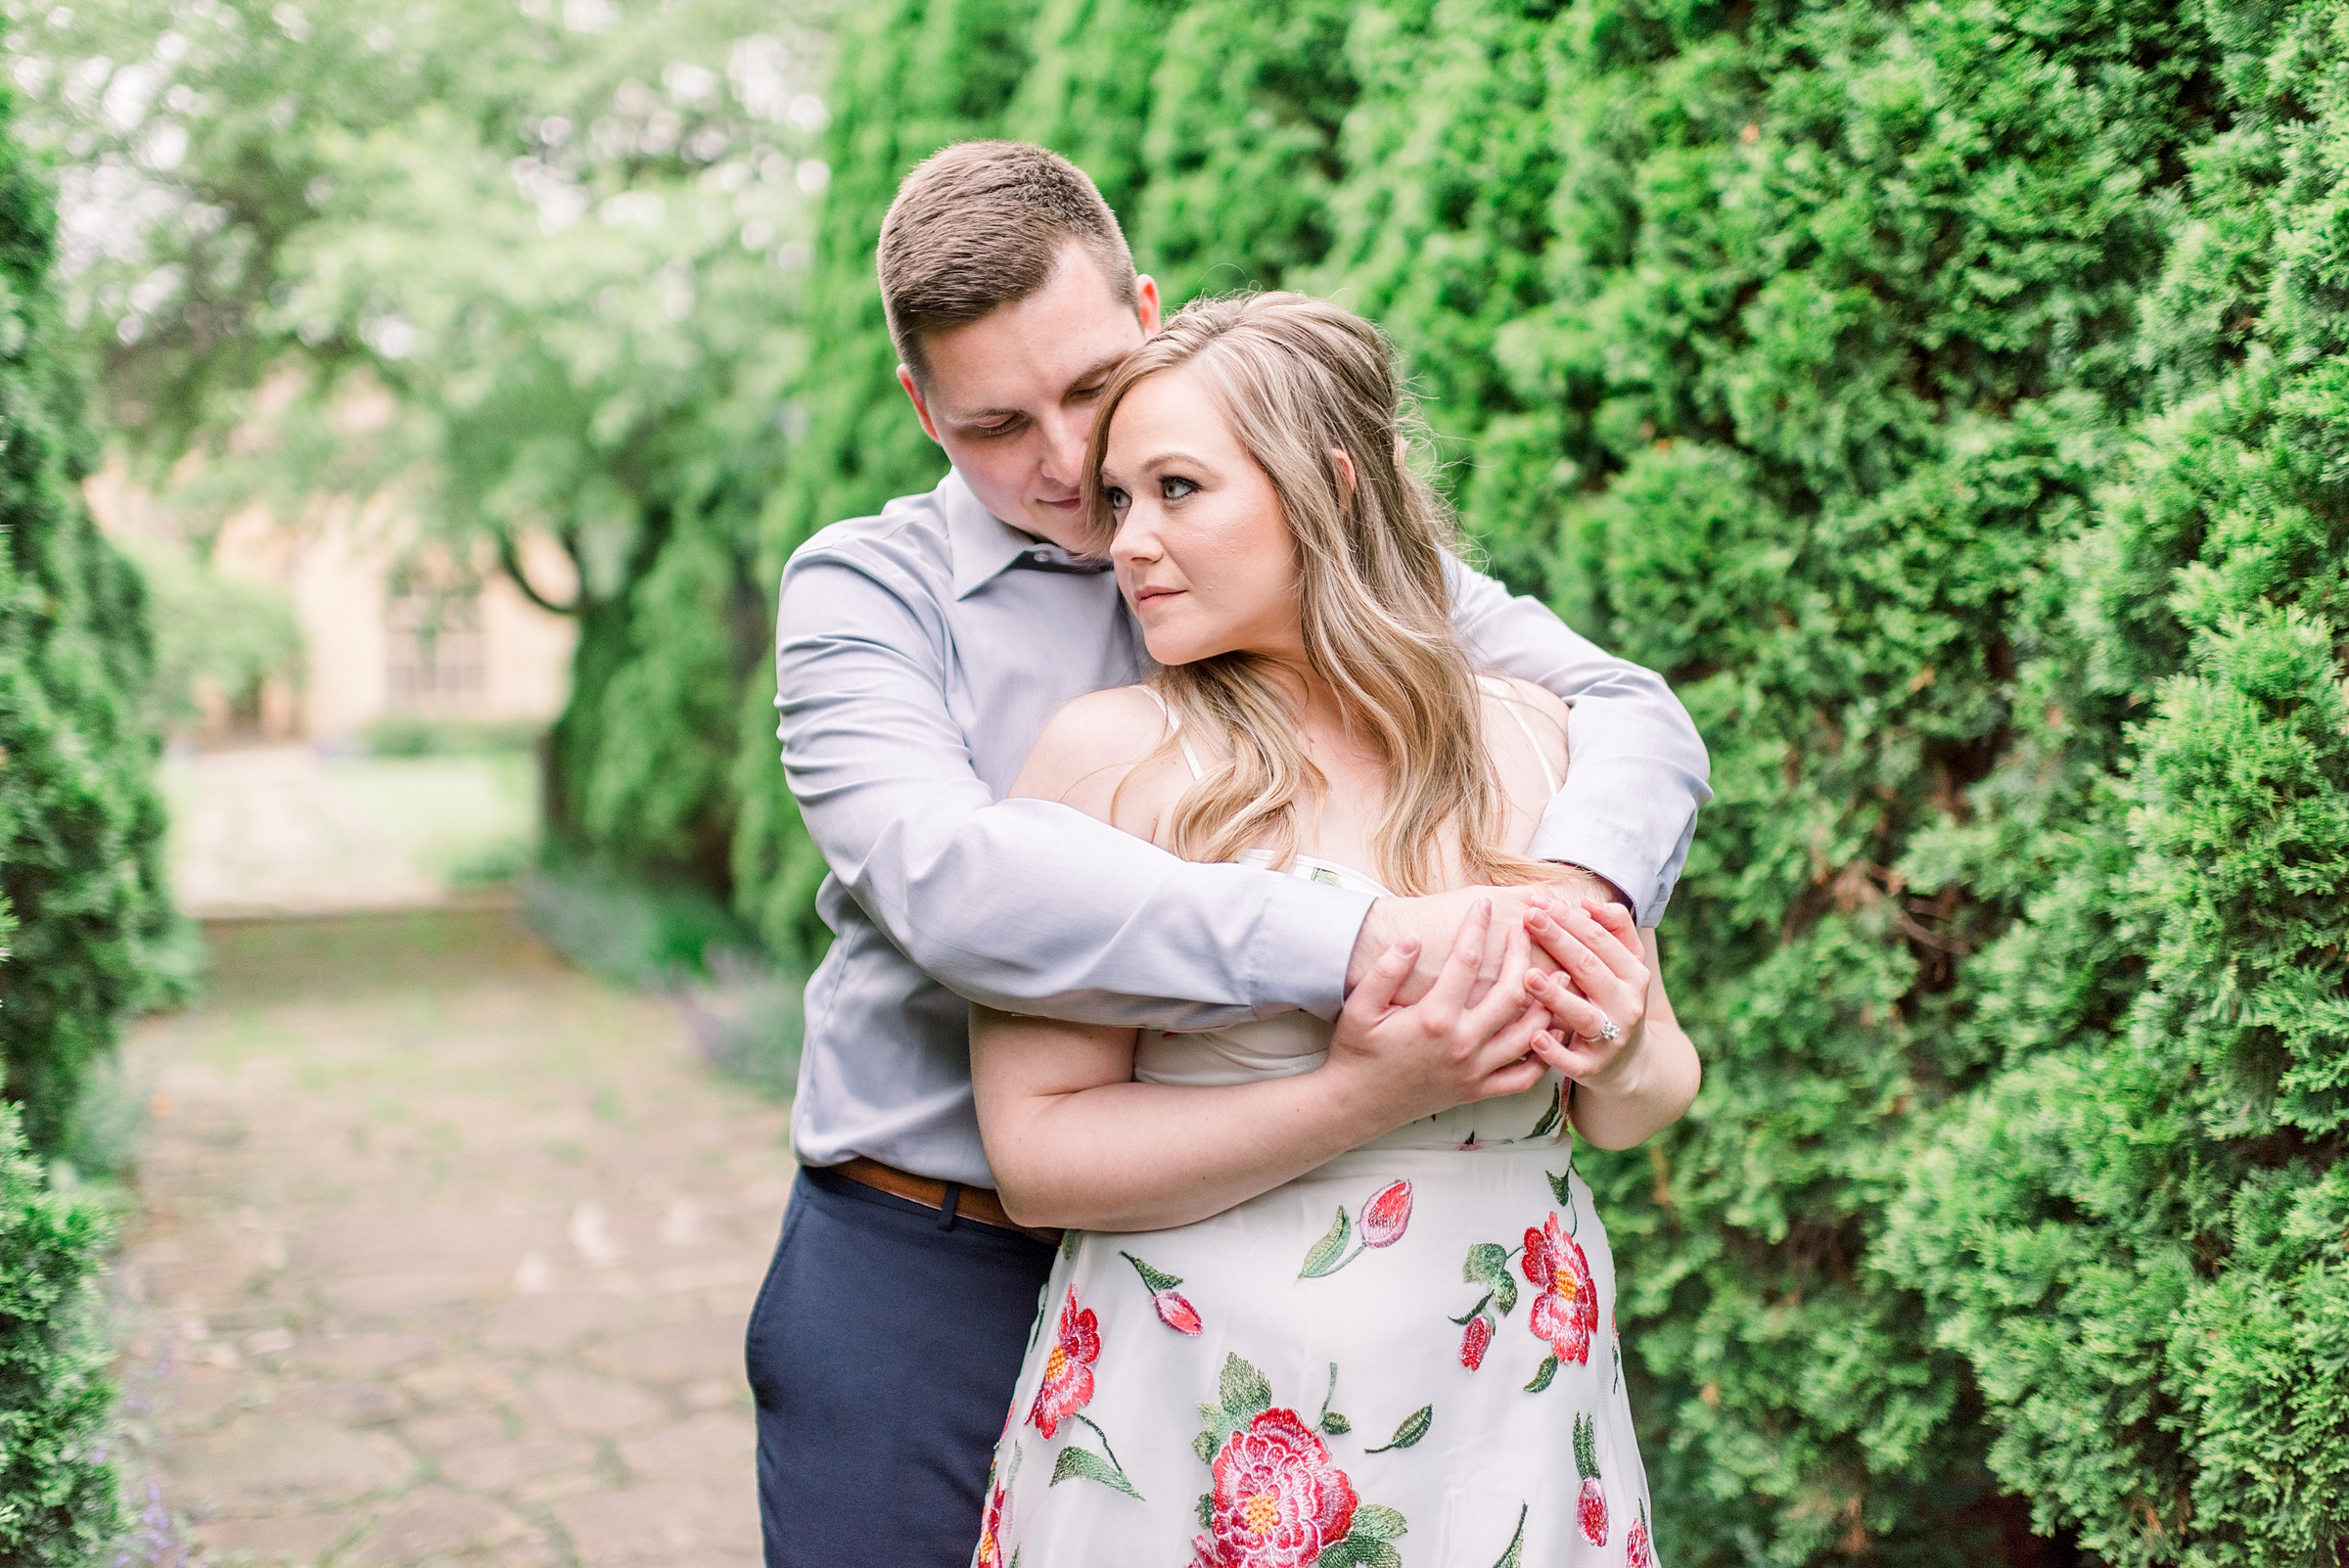 Paine Art Center and Gardens Engagement Session